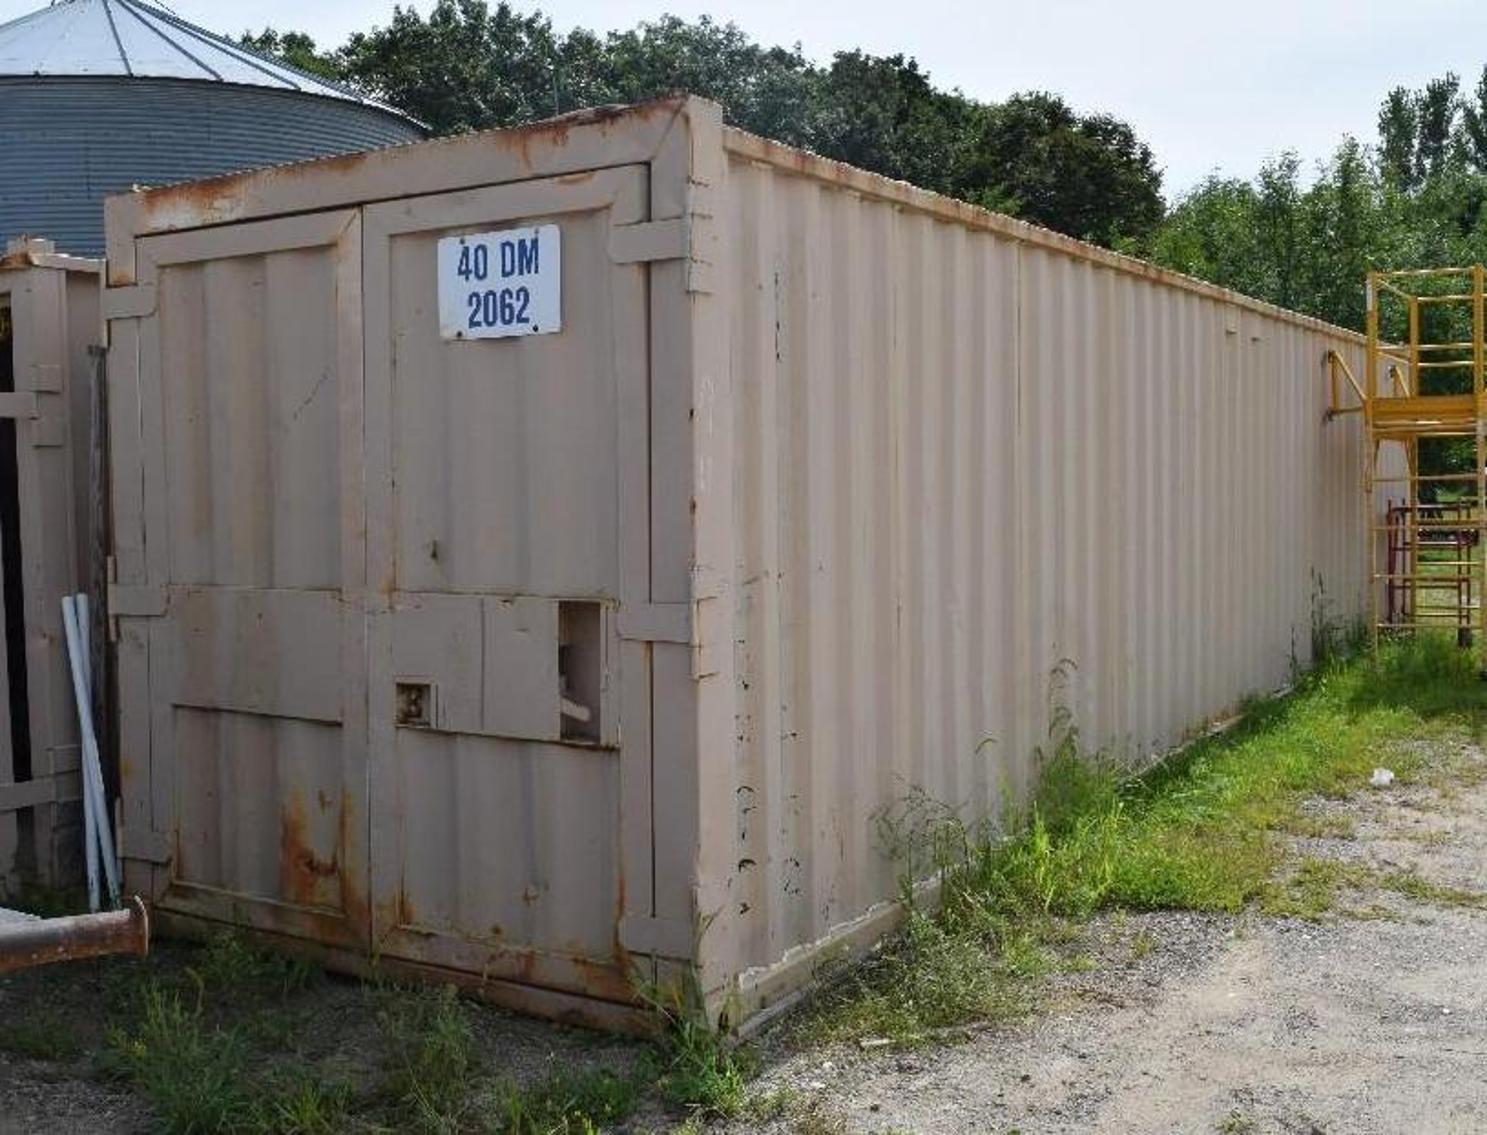 New Automotive Tools - 40' Enclosed Trailer - Sea Containers - Scratch/Dent Appliances and More